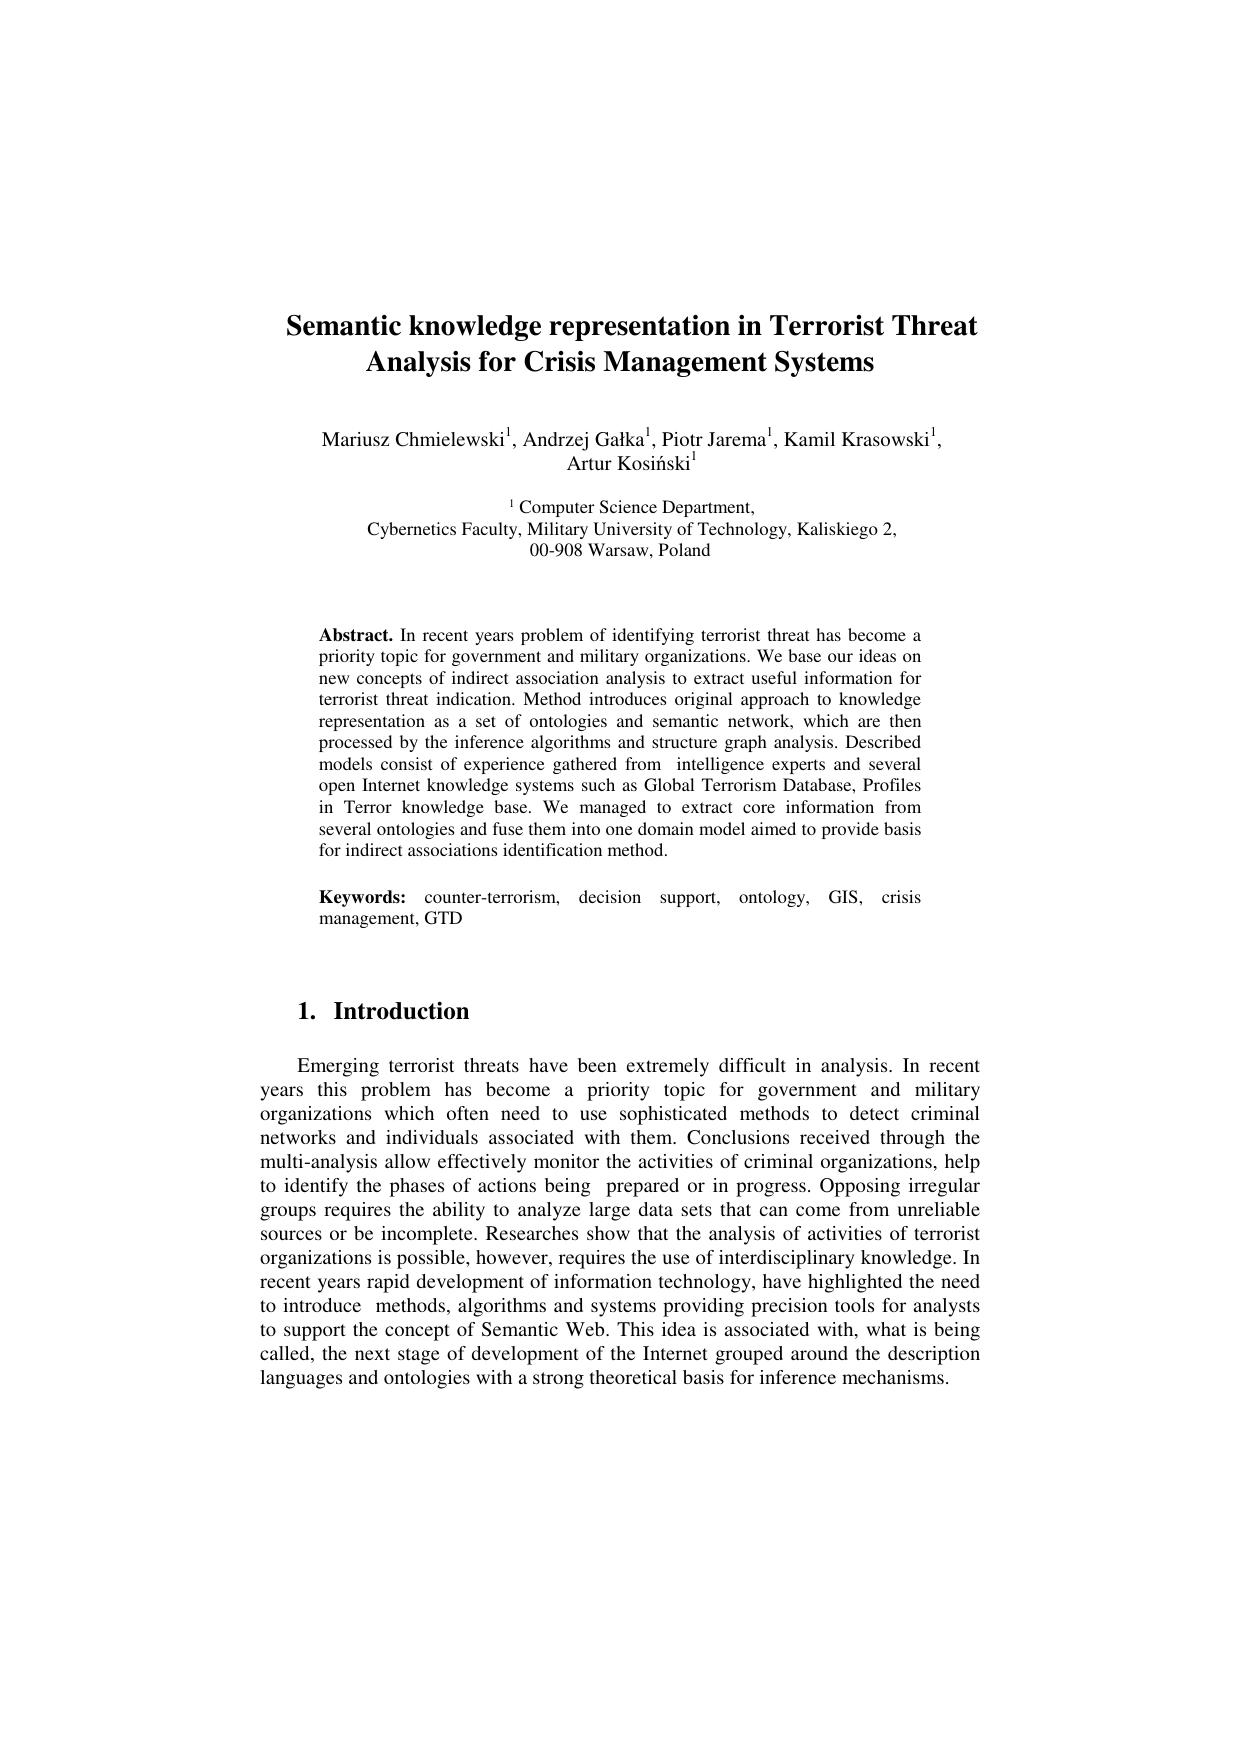 Semantic knowledge representation in Terrorist Threat - Analysis for Crisis Management Systems - Paper